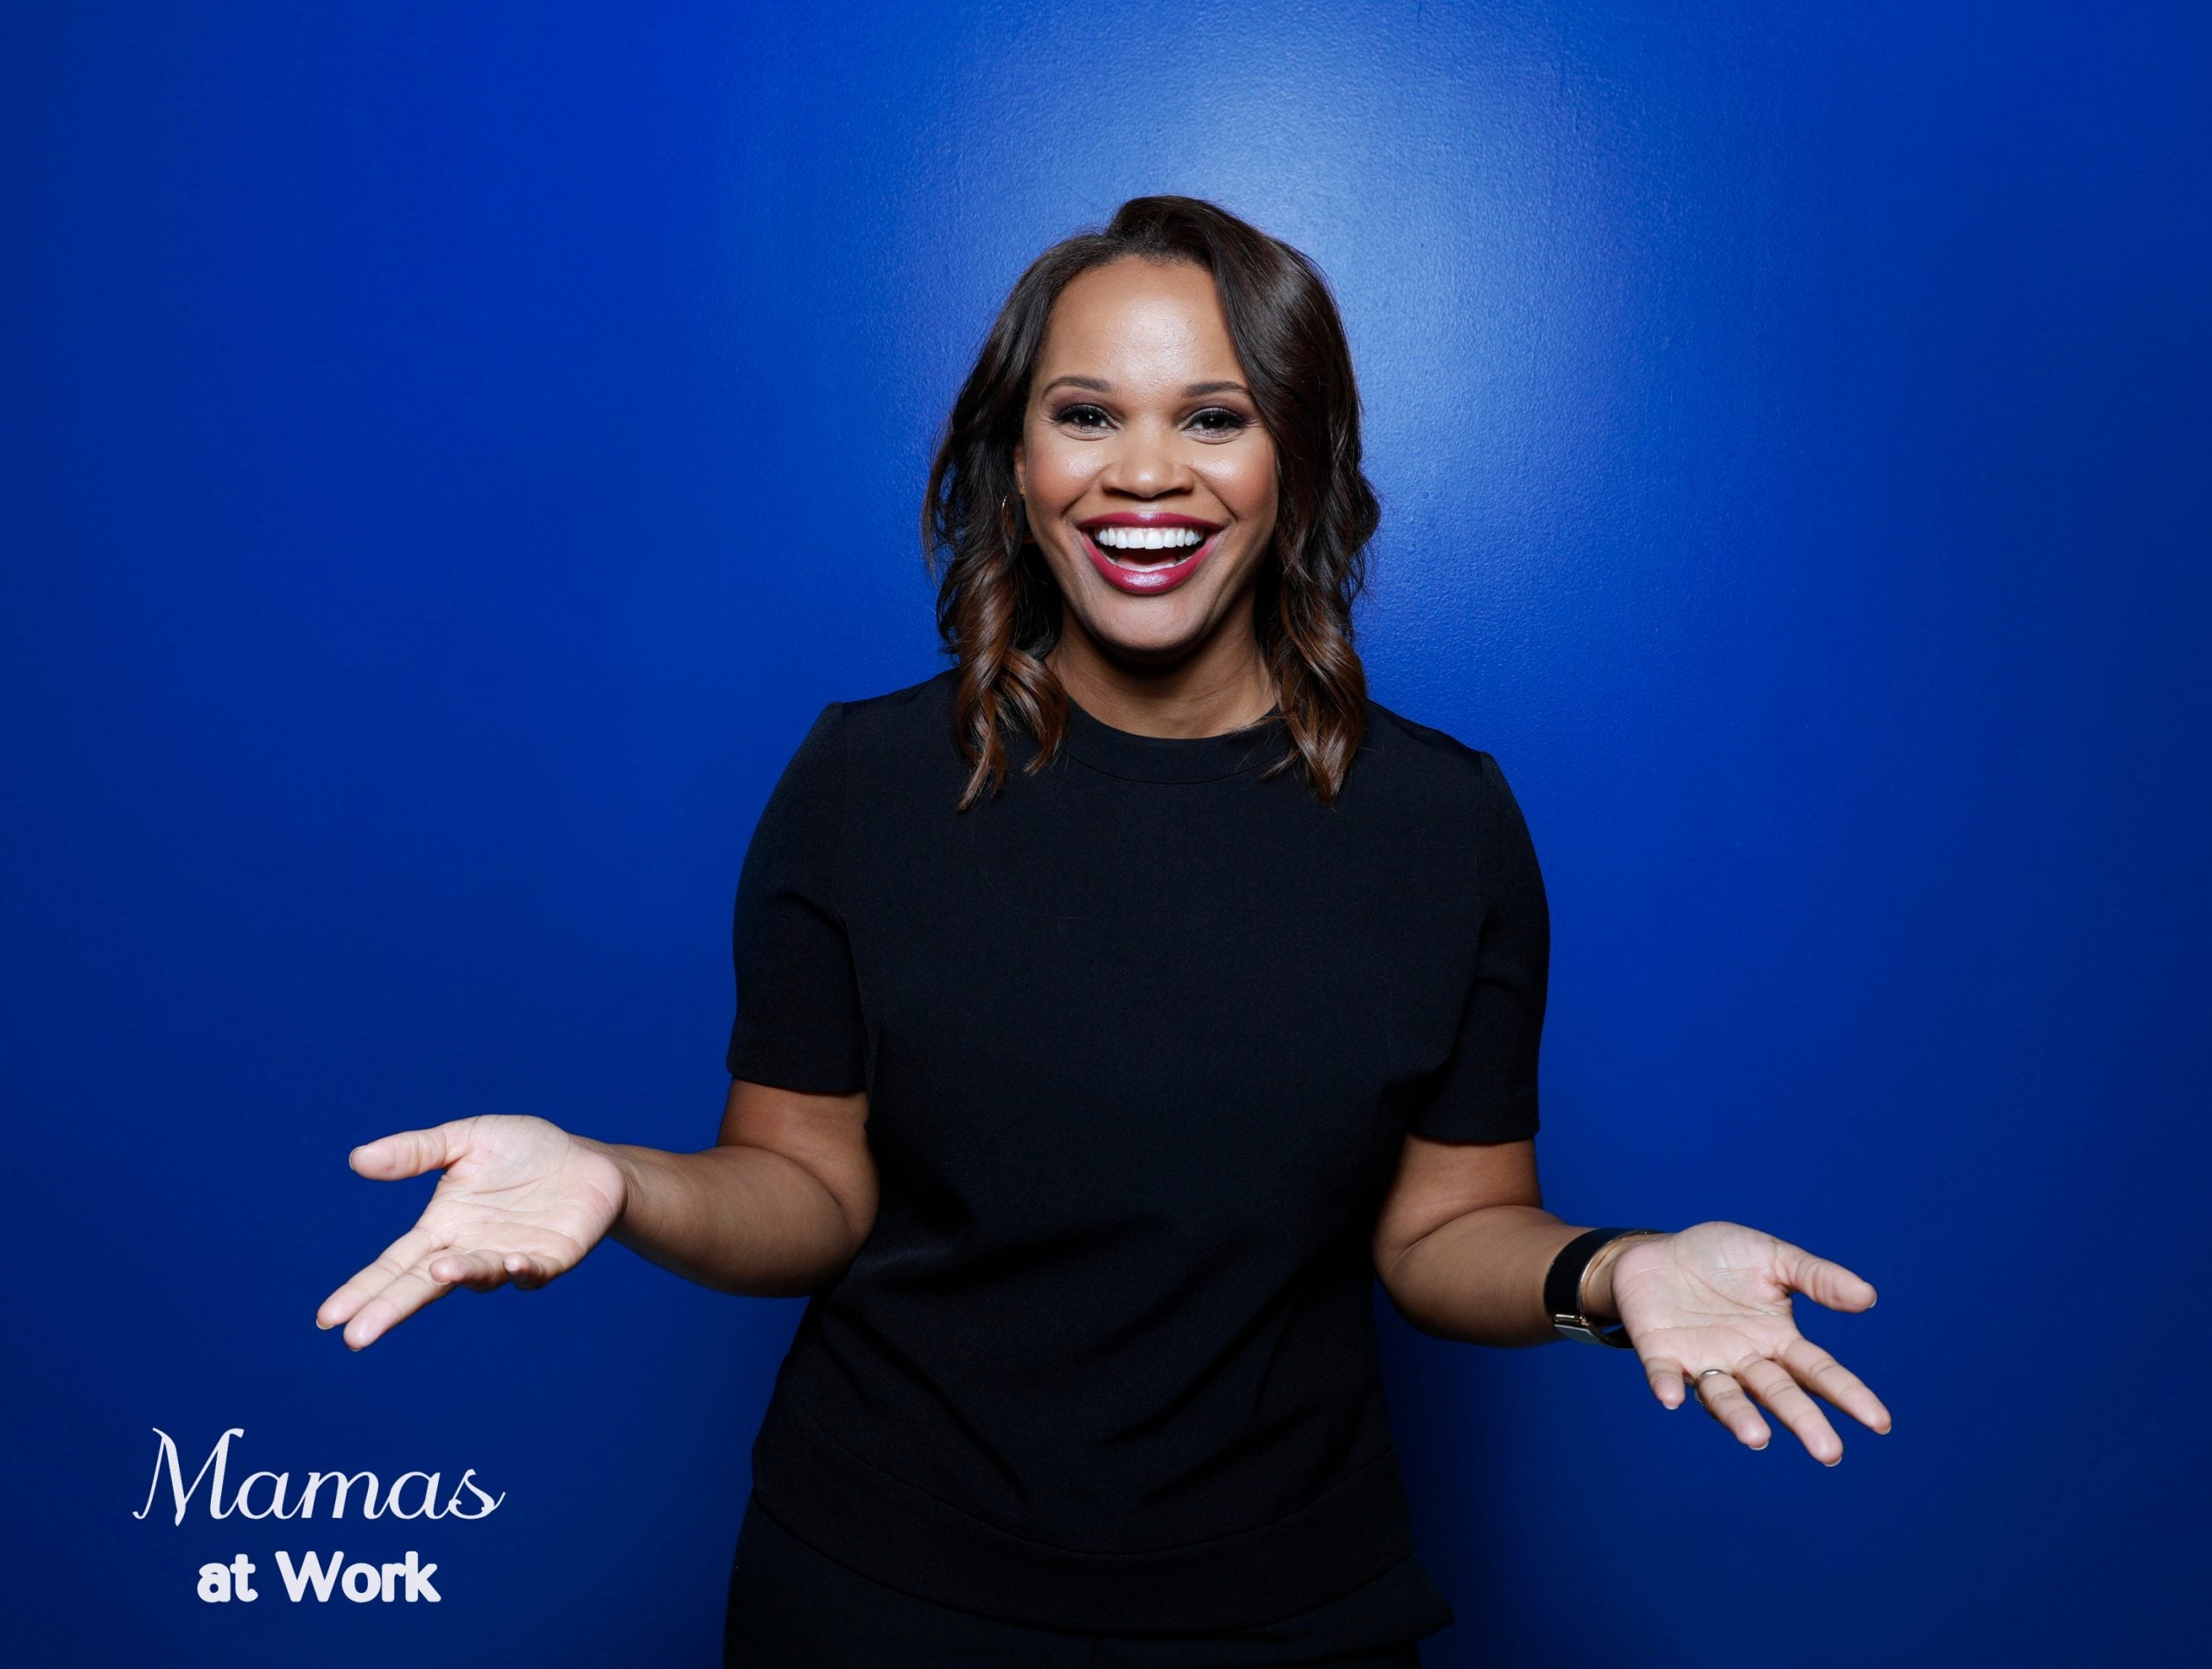 Mamas At Work: CNN Anchor Laura Coates On Juggling Career And Kids And Being 'Unapologetic' About Me Time